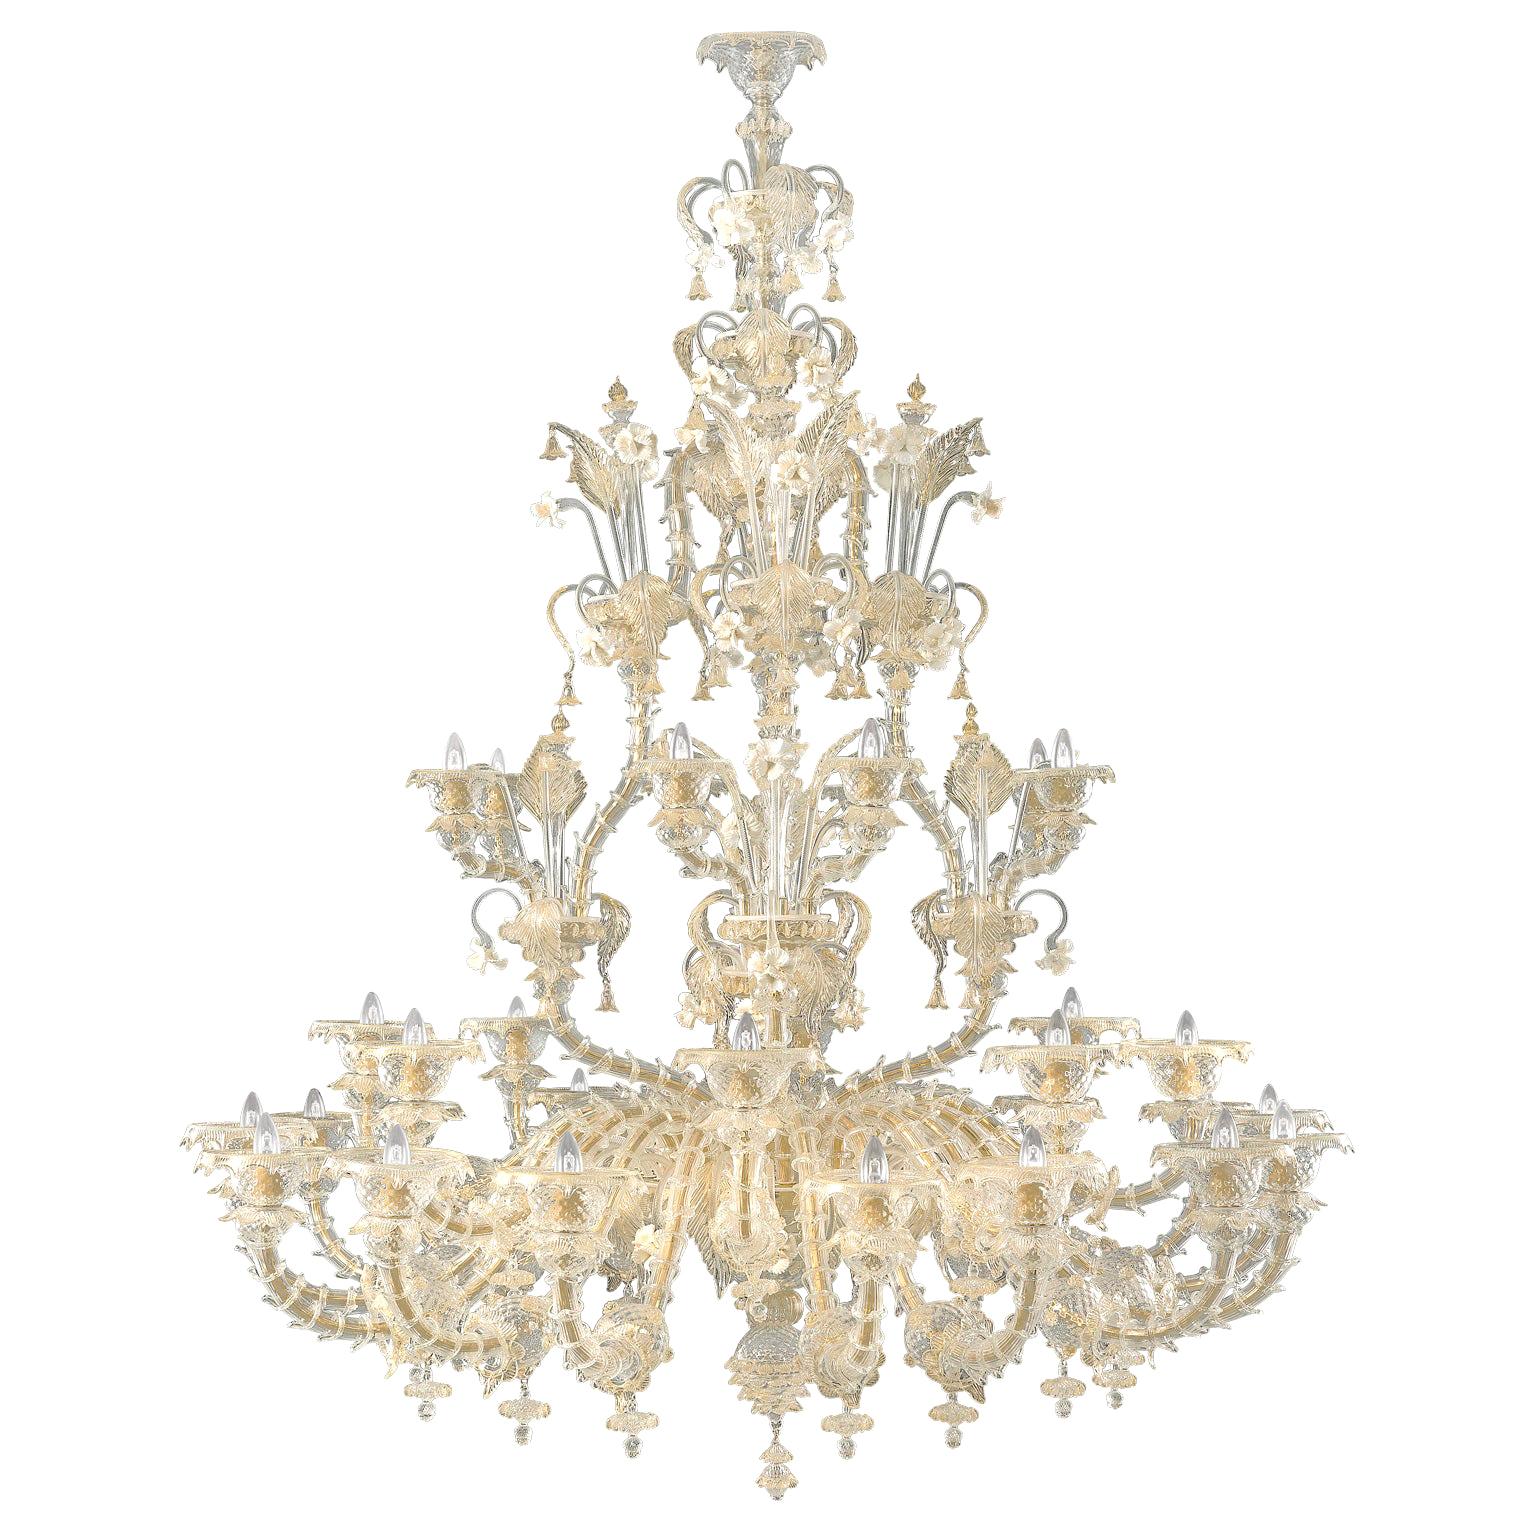 Artistic Chandelier 16+8+8 arms Crystal Murano Glass gold details by Multiforme For Sale